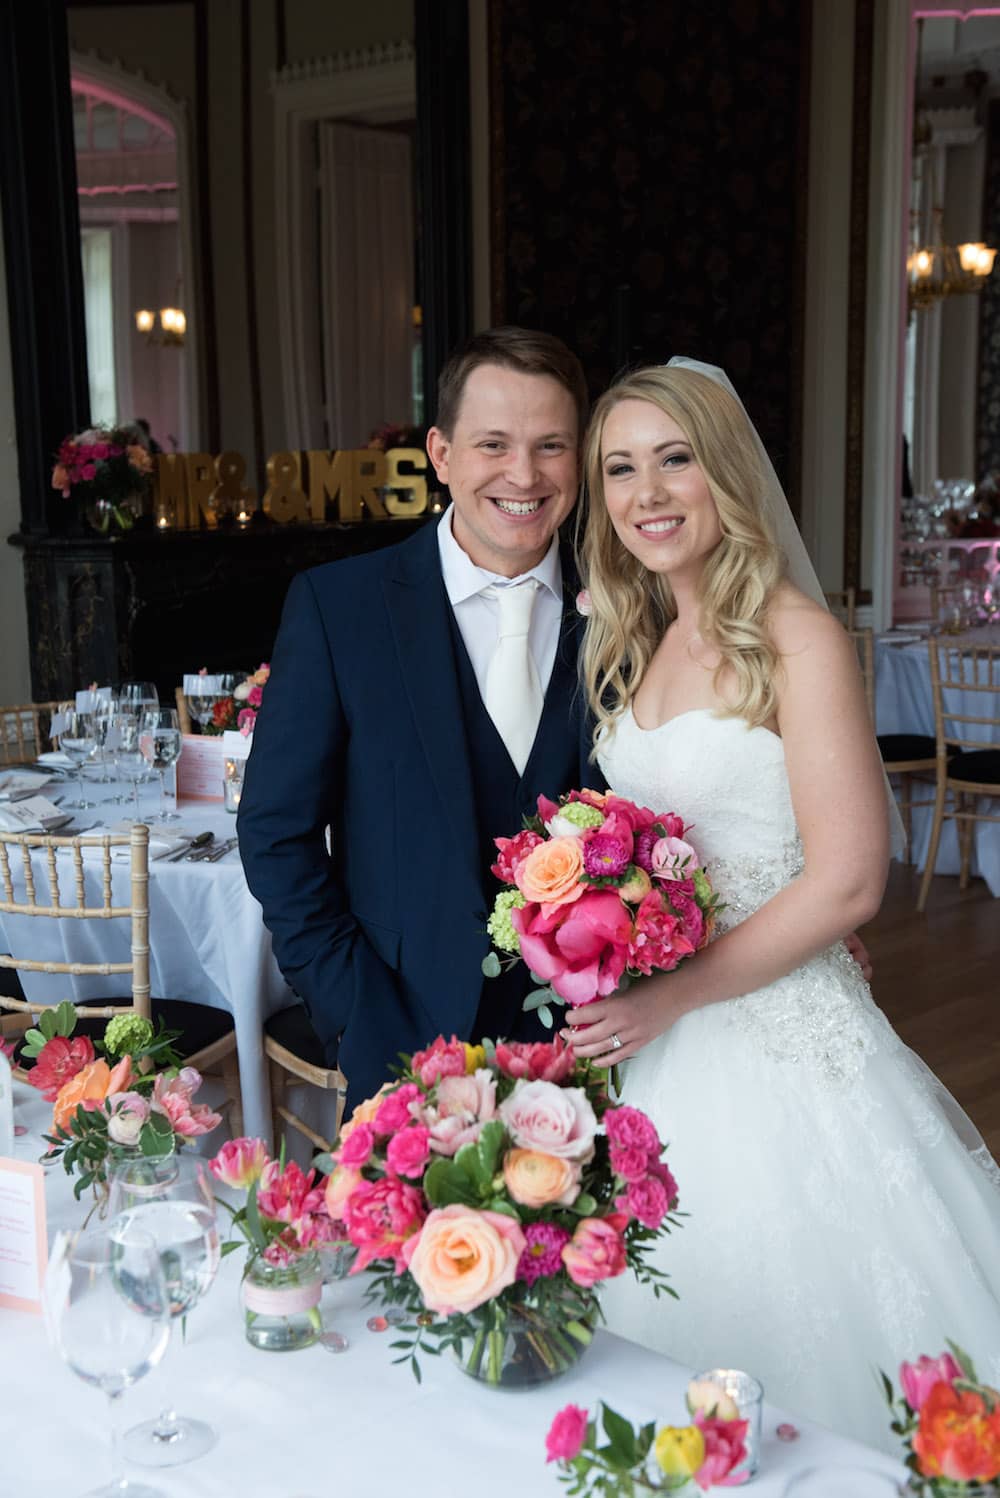 nonsuch mansion spring wedding, colourful table flowers